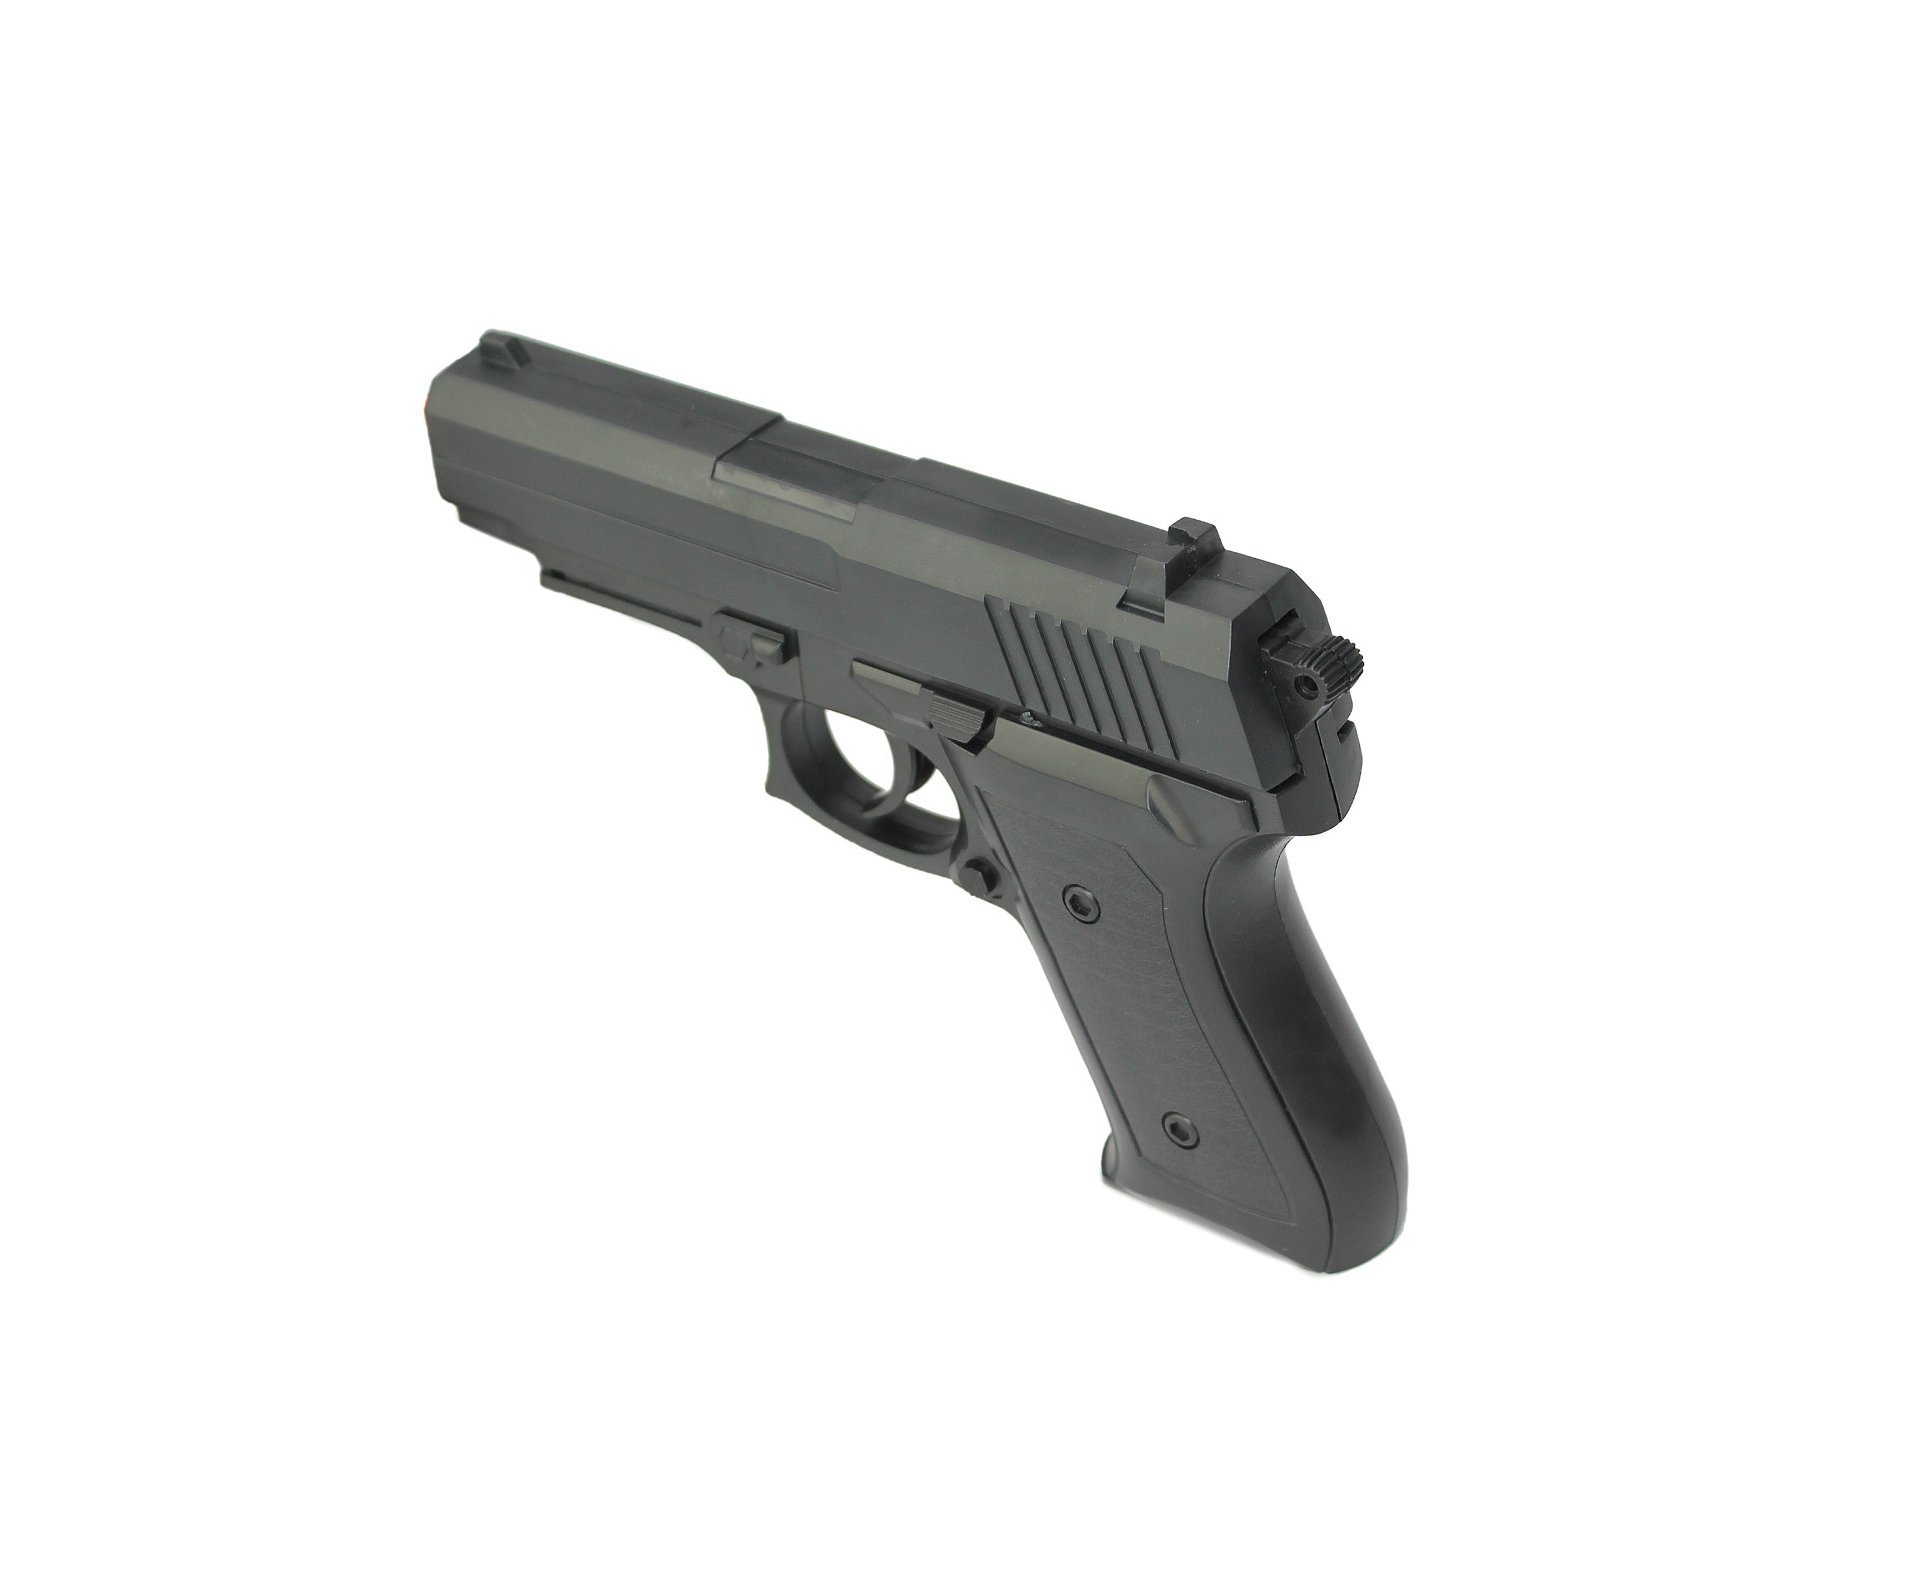 Pistola De Airsoft Wg-cyma 1918 Toy Abs 6mm